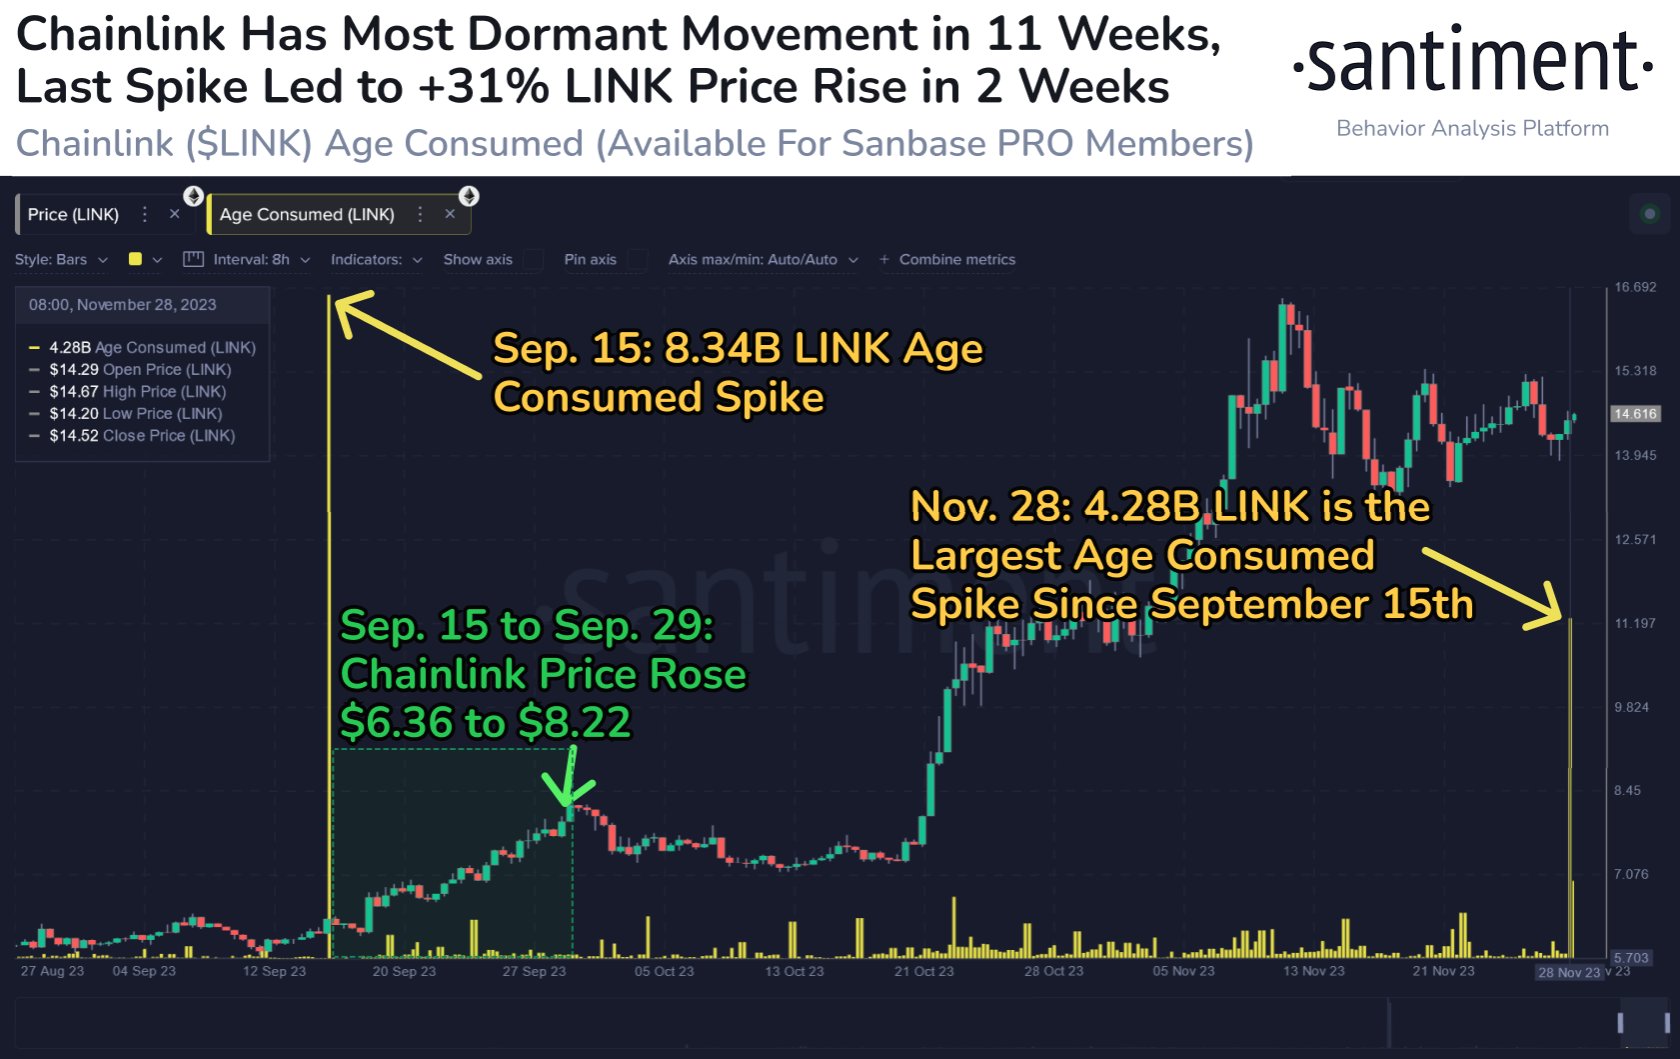 Chainlink Age Consumed